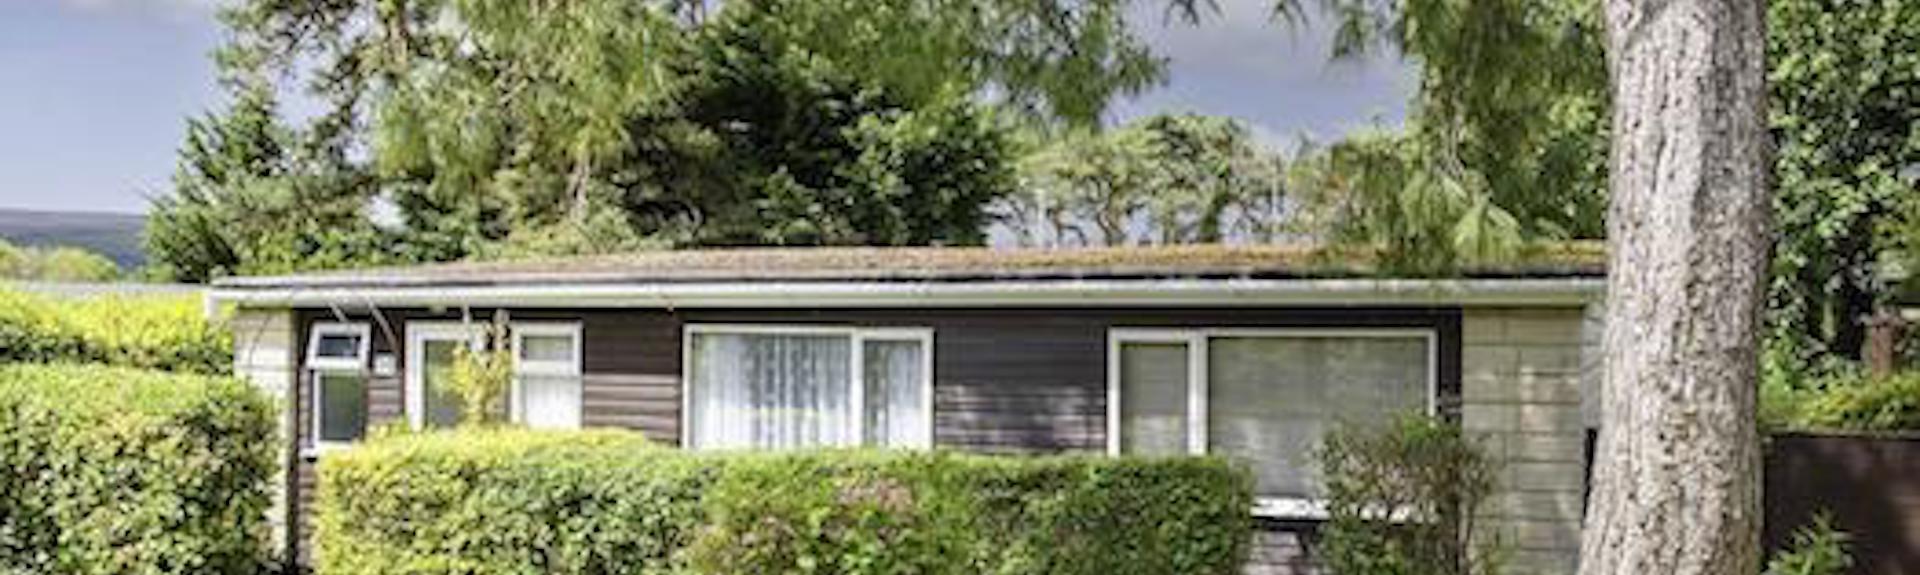 Exterior of a wooden holiday lodge in Watchet, surrounded by lawns,mature pine tree and beach hedges.